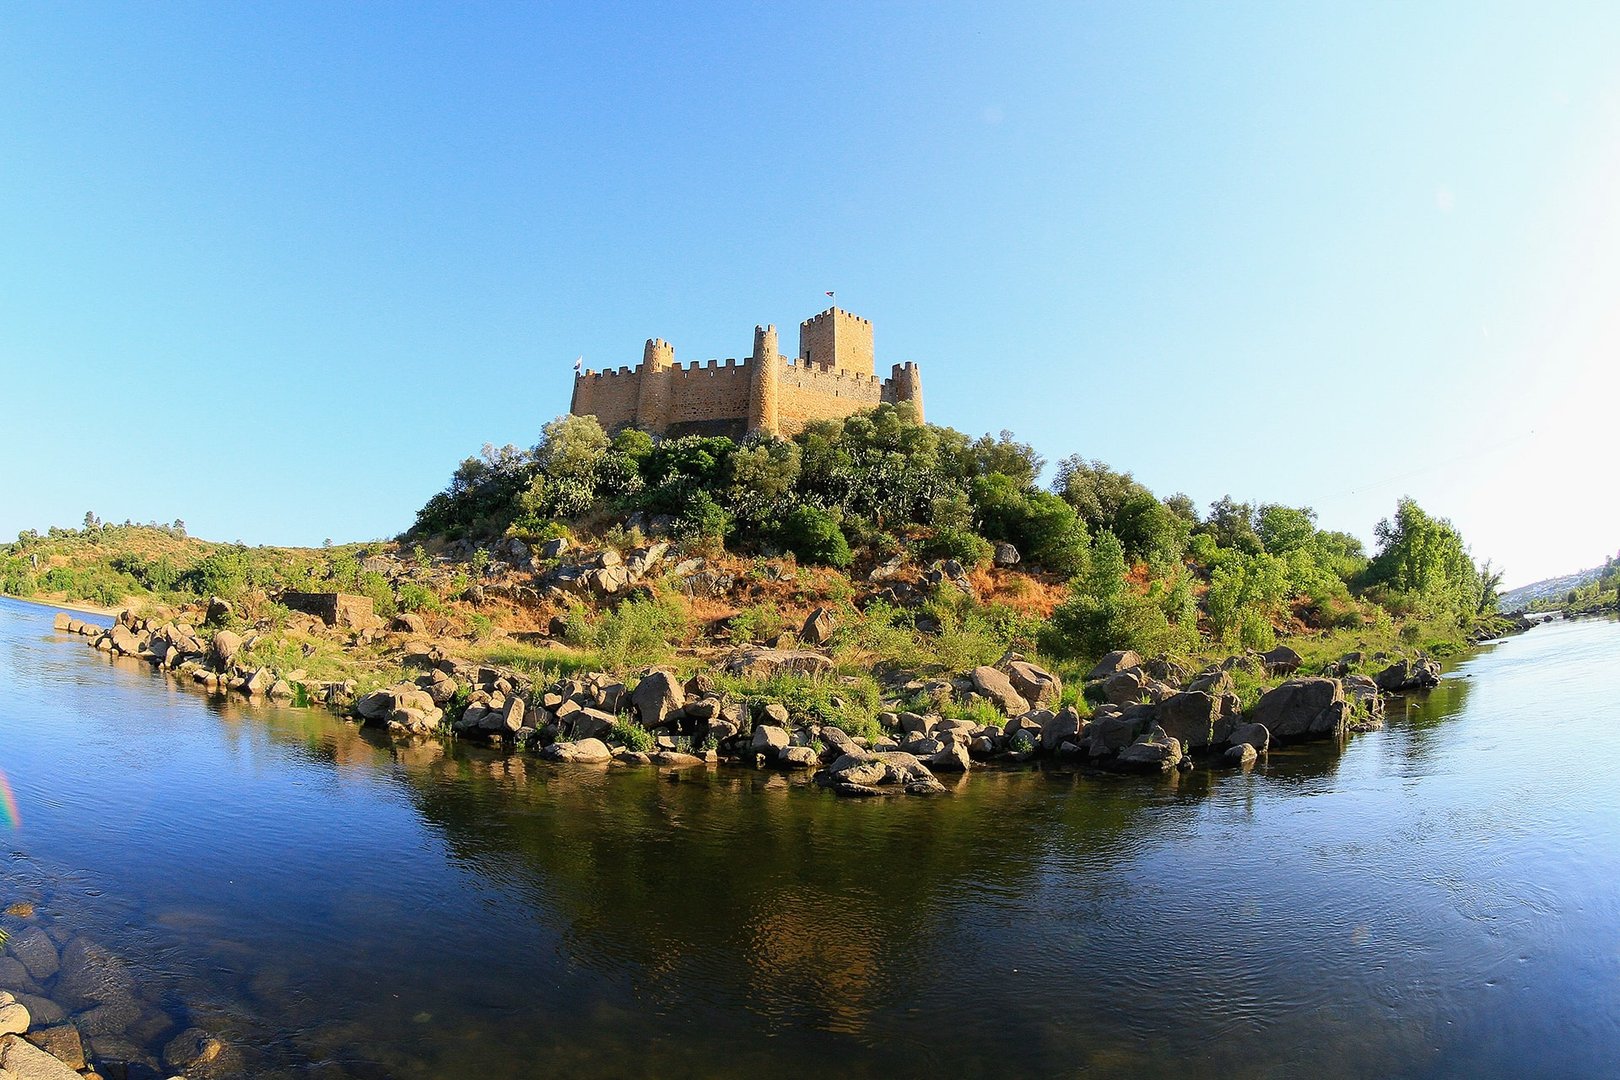 Located on a small, rugged island in the Tagus, it is one of the most beautiful castles of Portugal